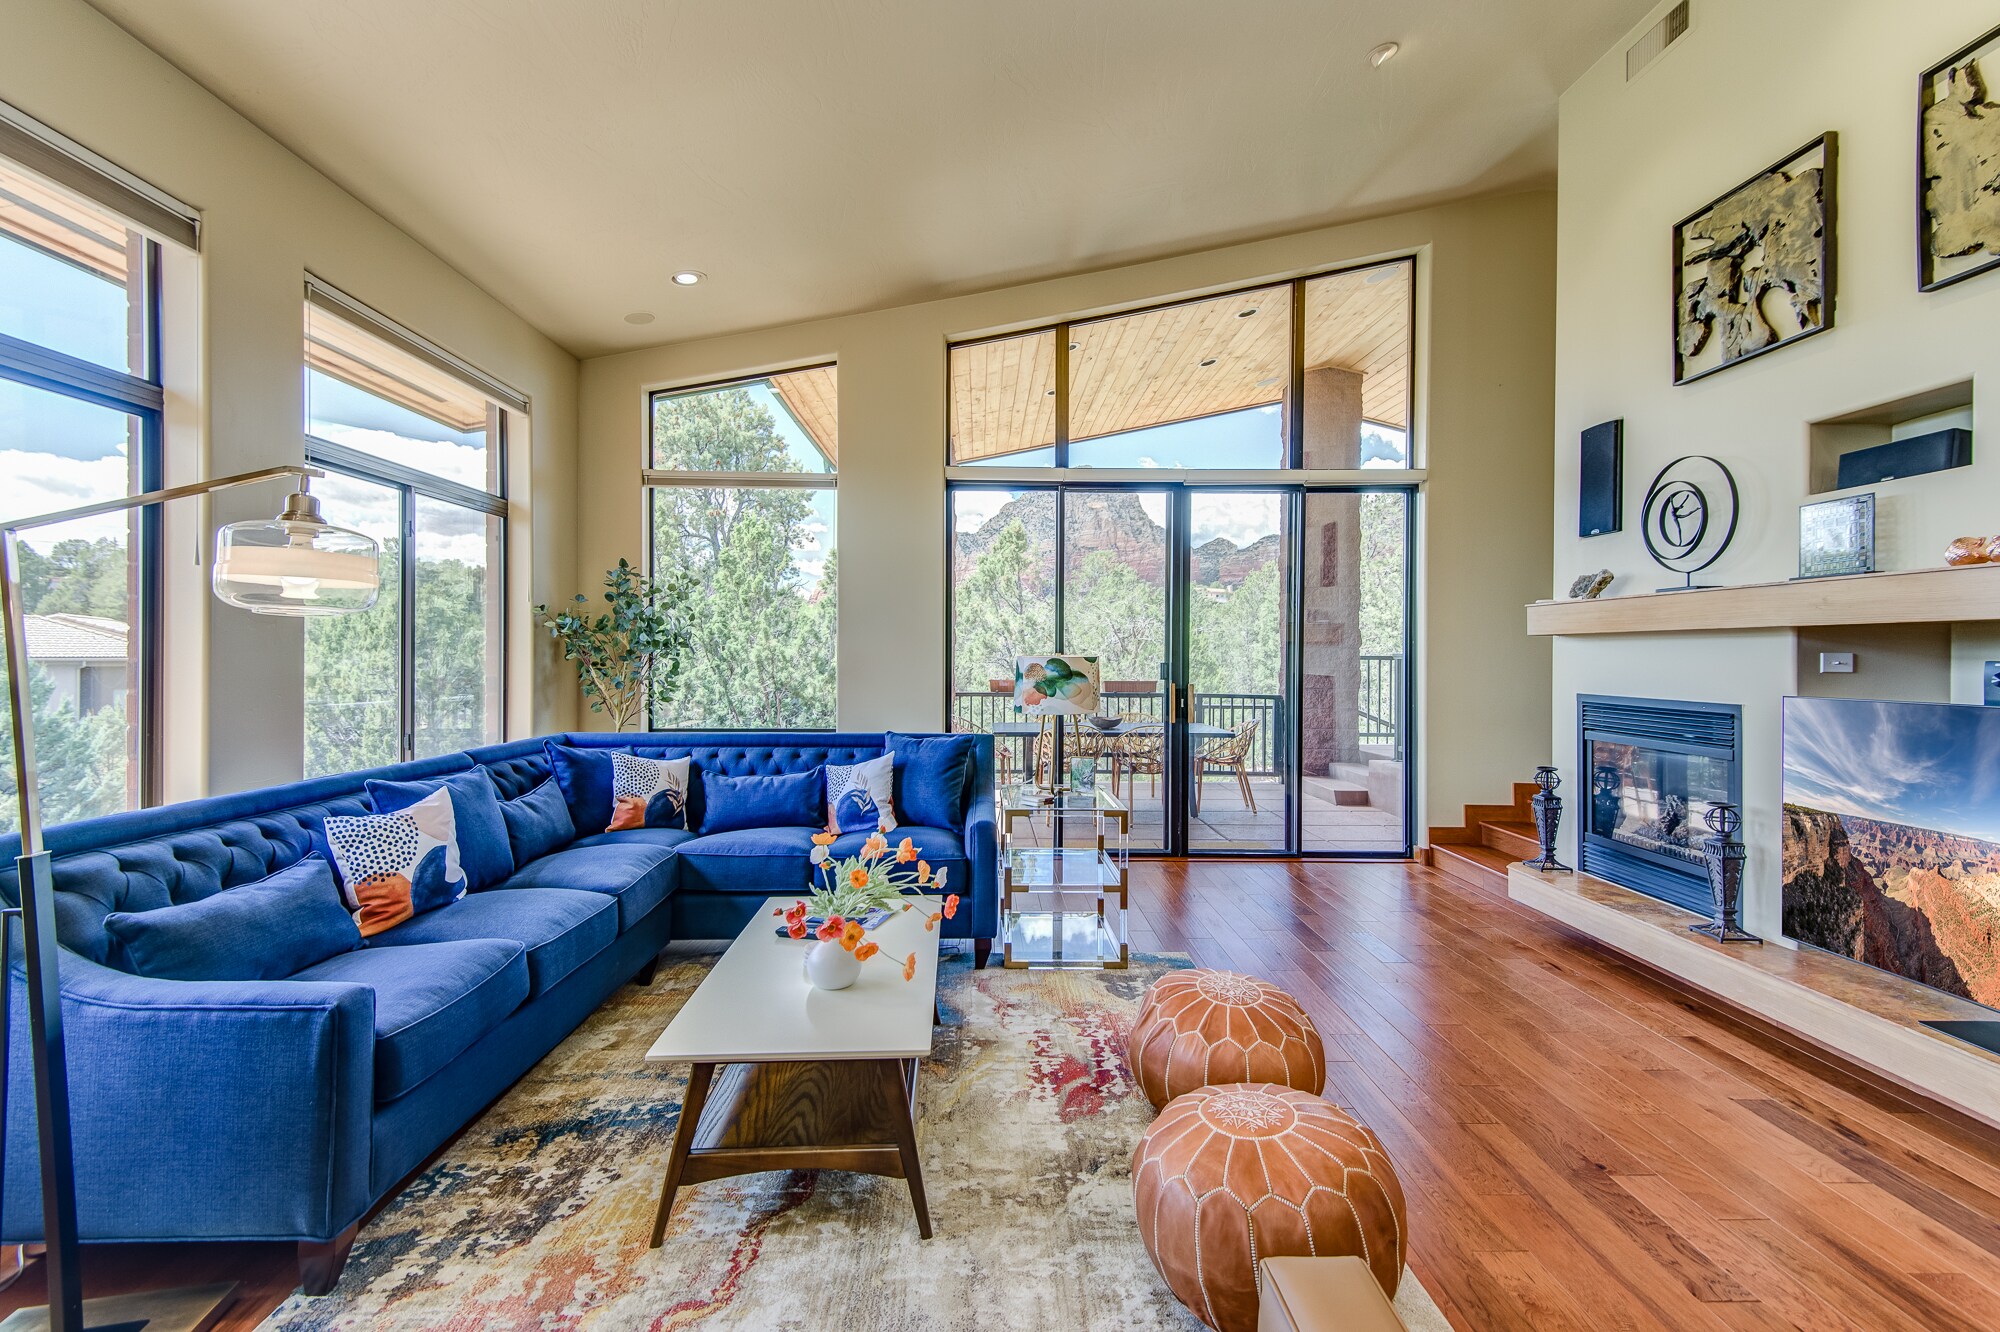 Remodeled Home with Stunning Hardwood Floors, High Ceilings and Amazing Views